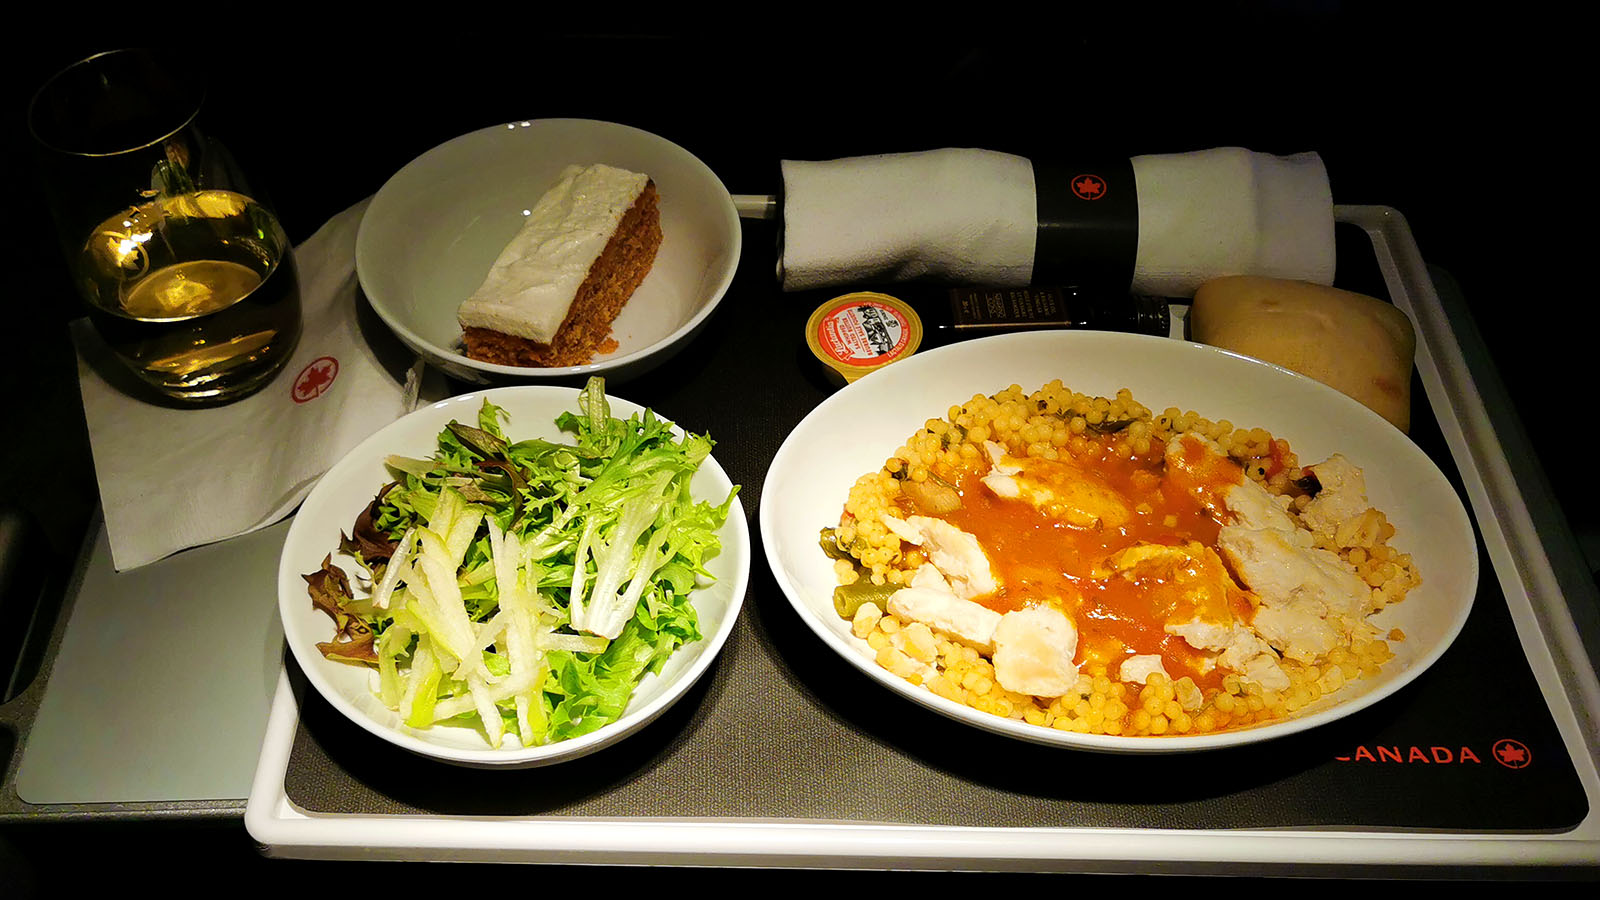 Chicken dinner in Air Canada Bombardier CRJ900 Business Class